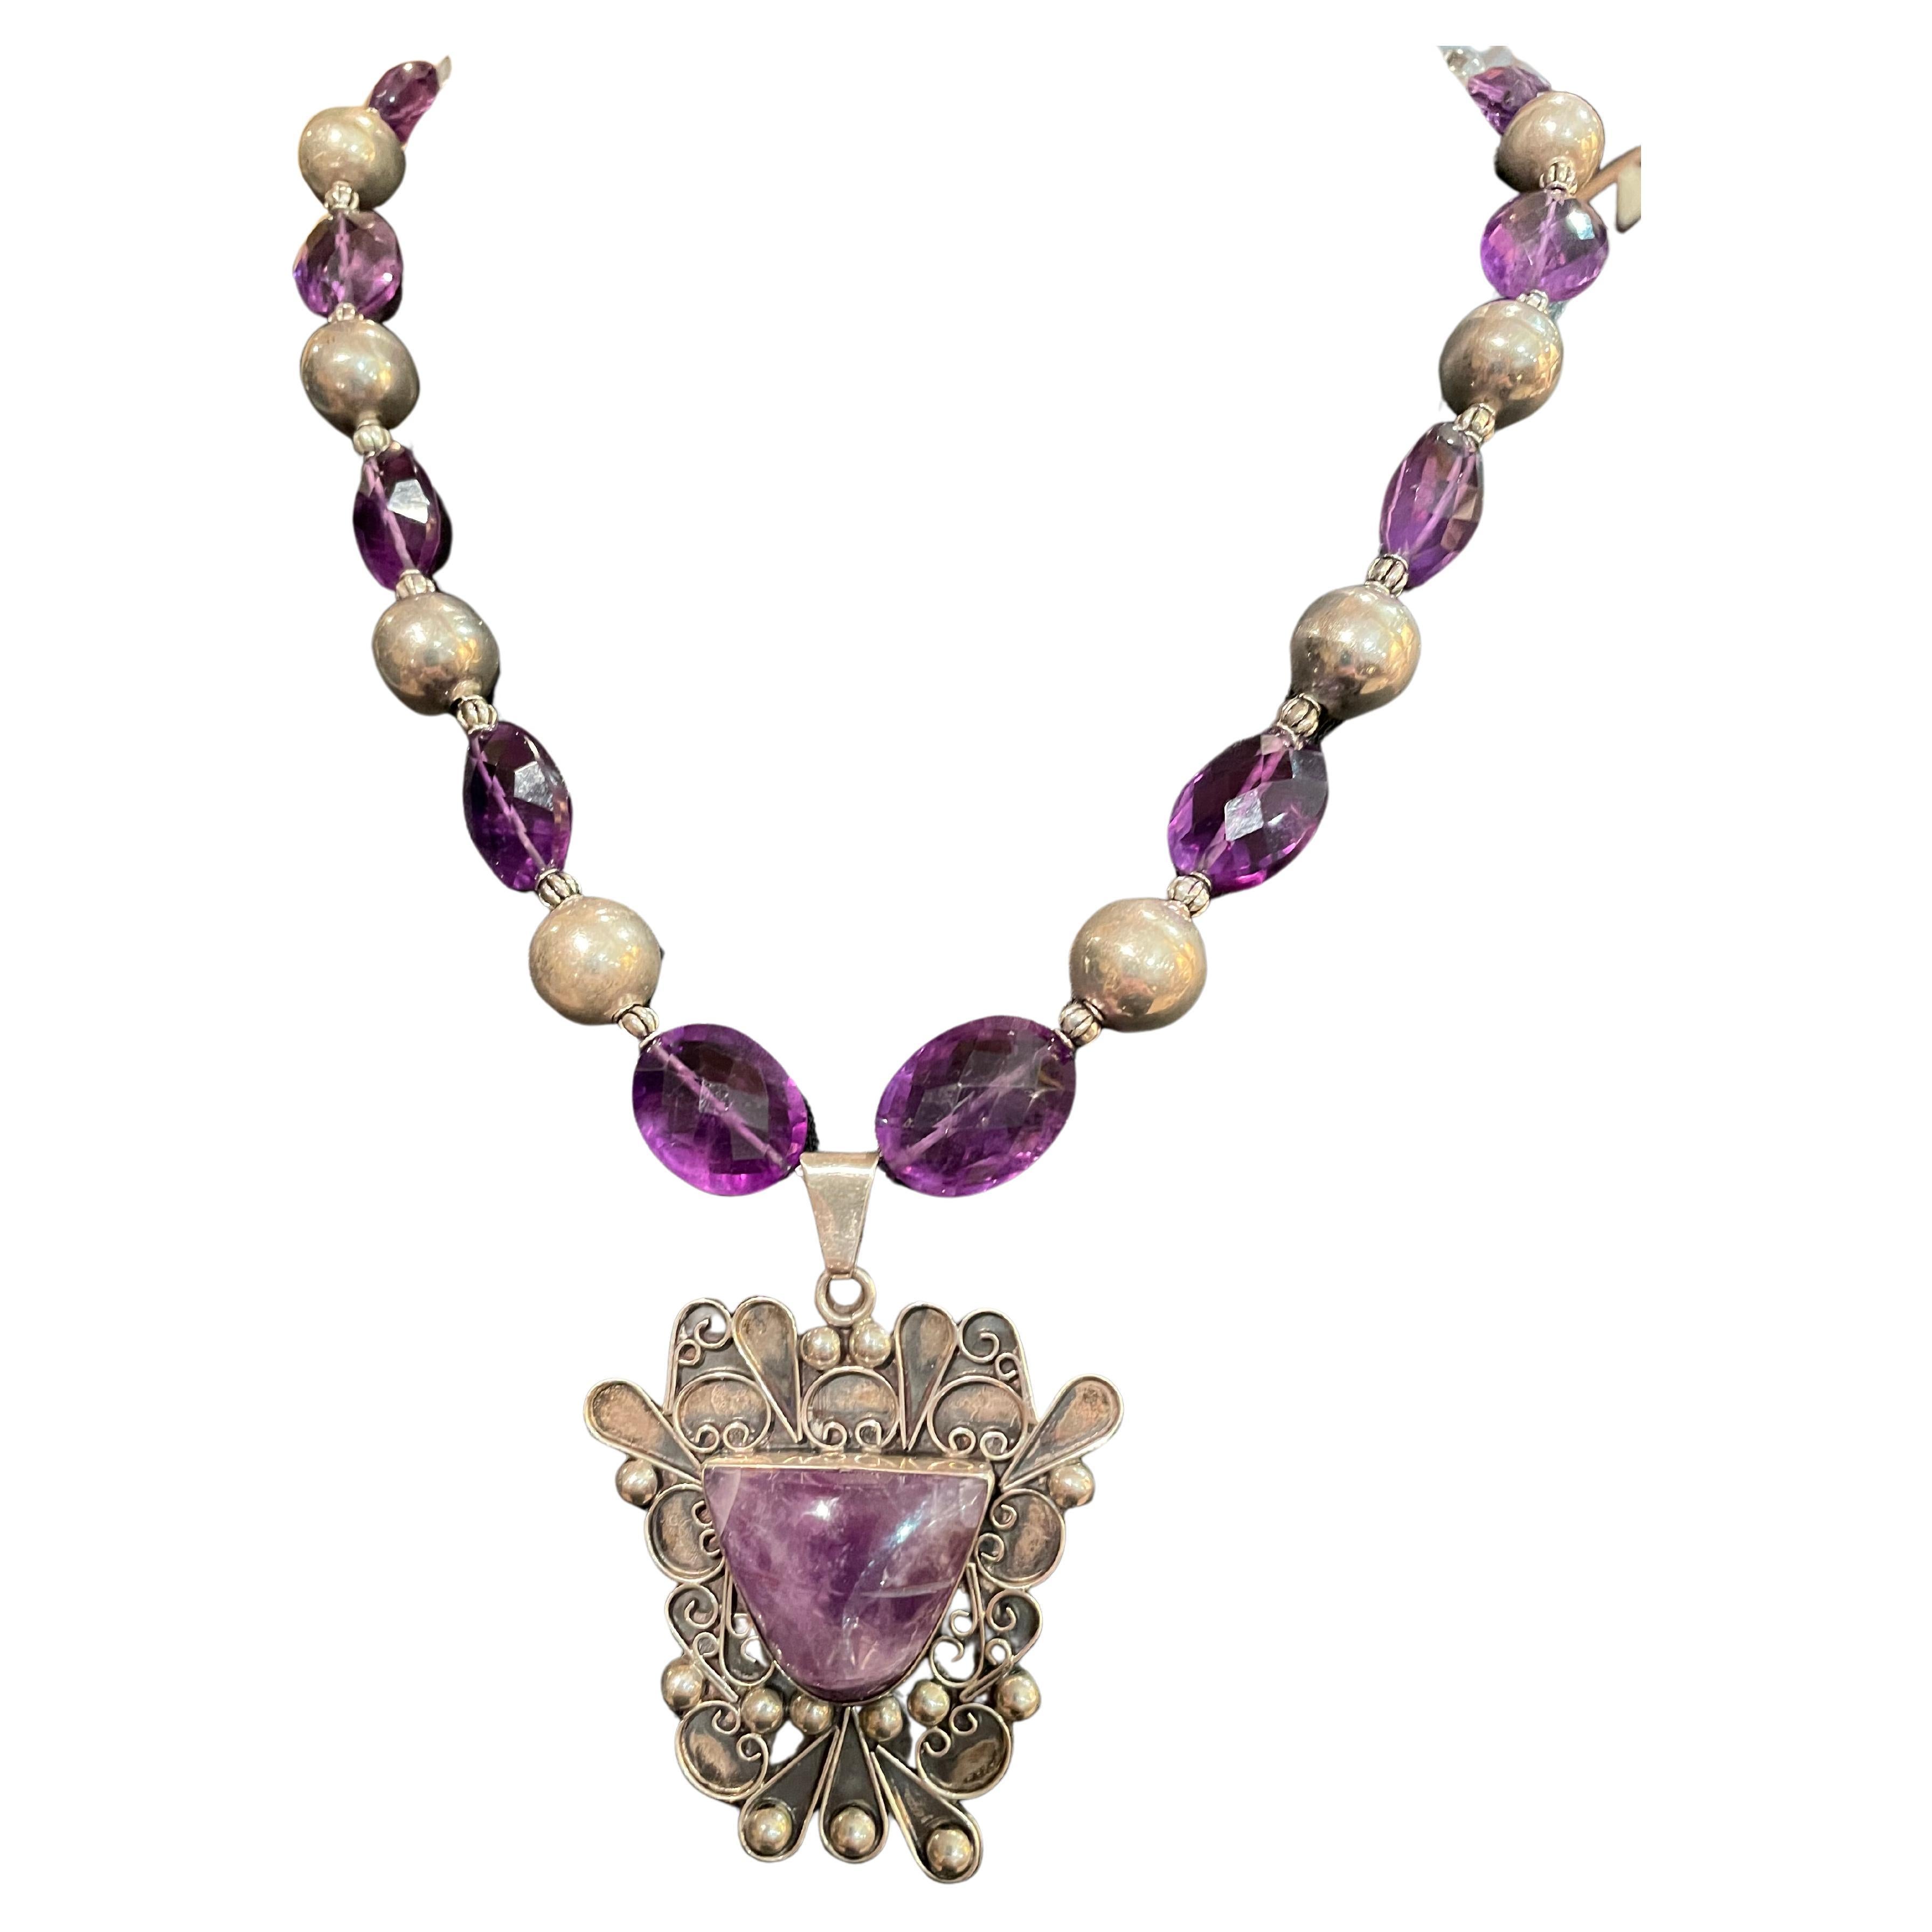 LB offers Vintage Mexican Sterling/Amethyst Aztec Pendant Sterling bead necklace For Sale